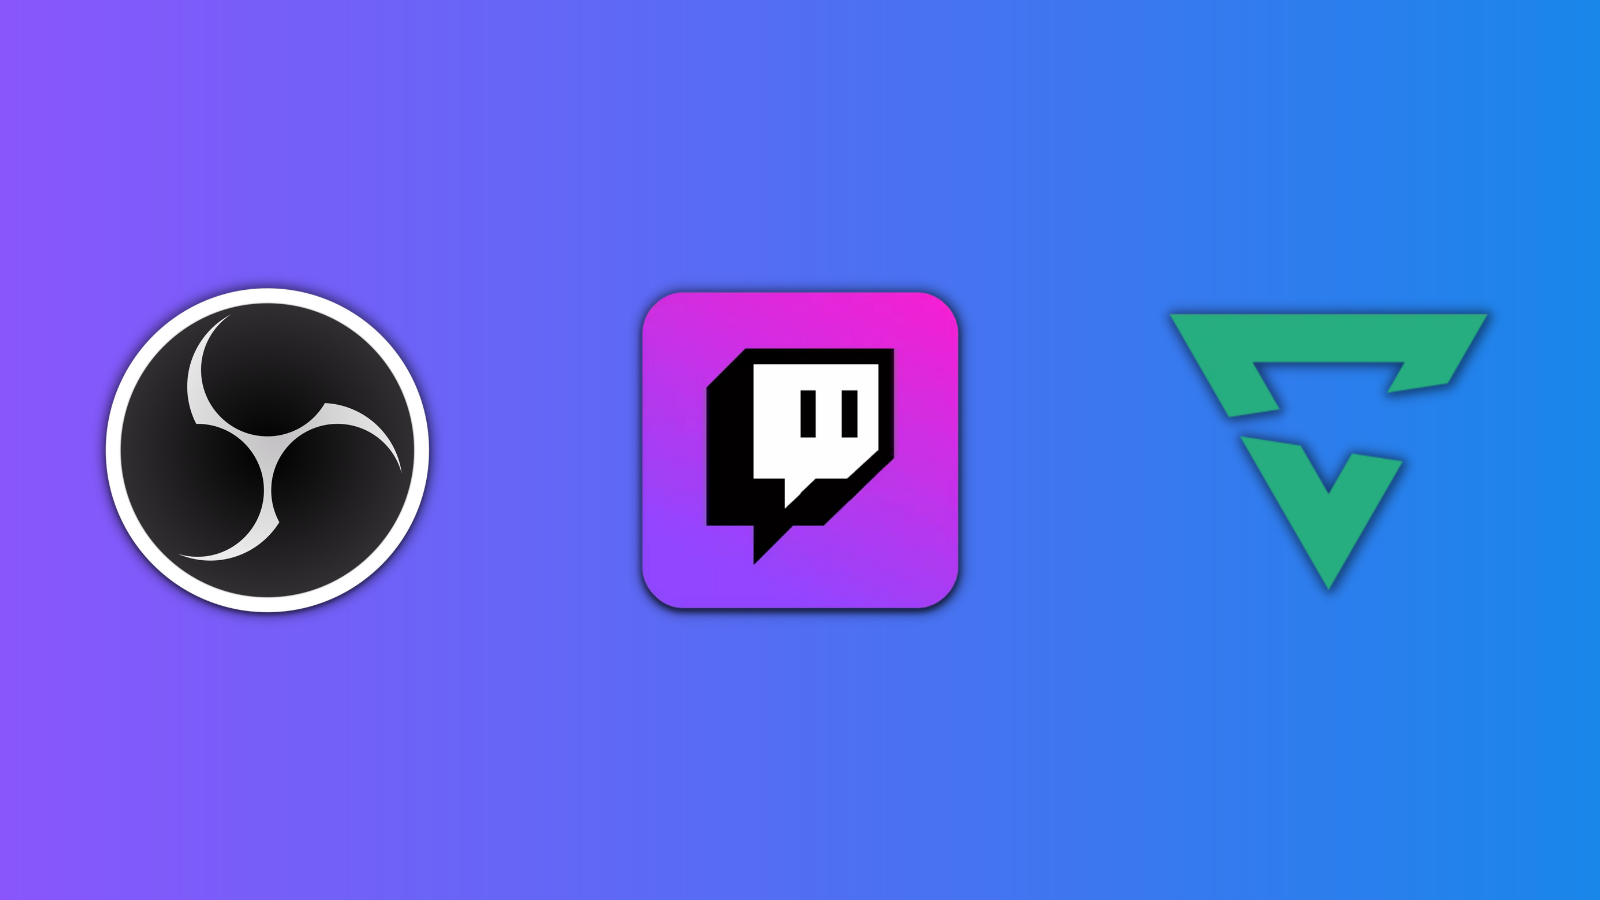 This image shows the logos of OBS Studio, Twitch Studio, and Lightstream.